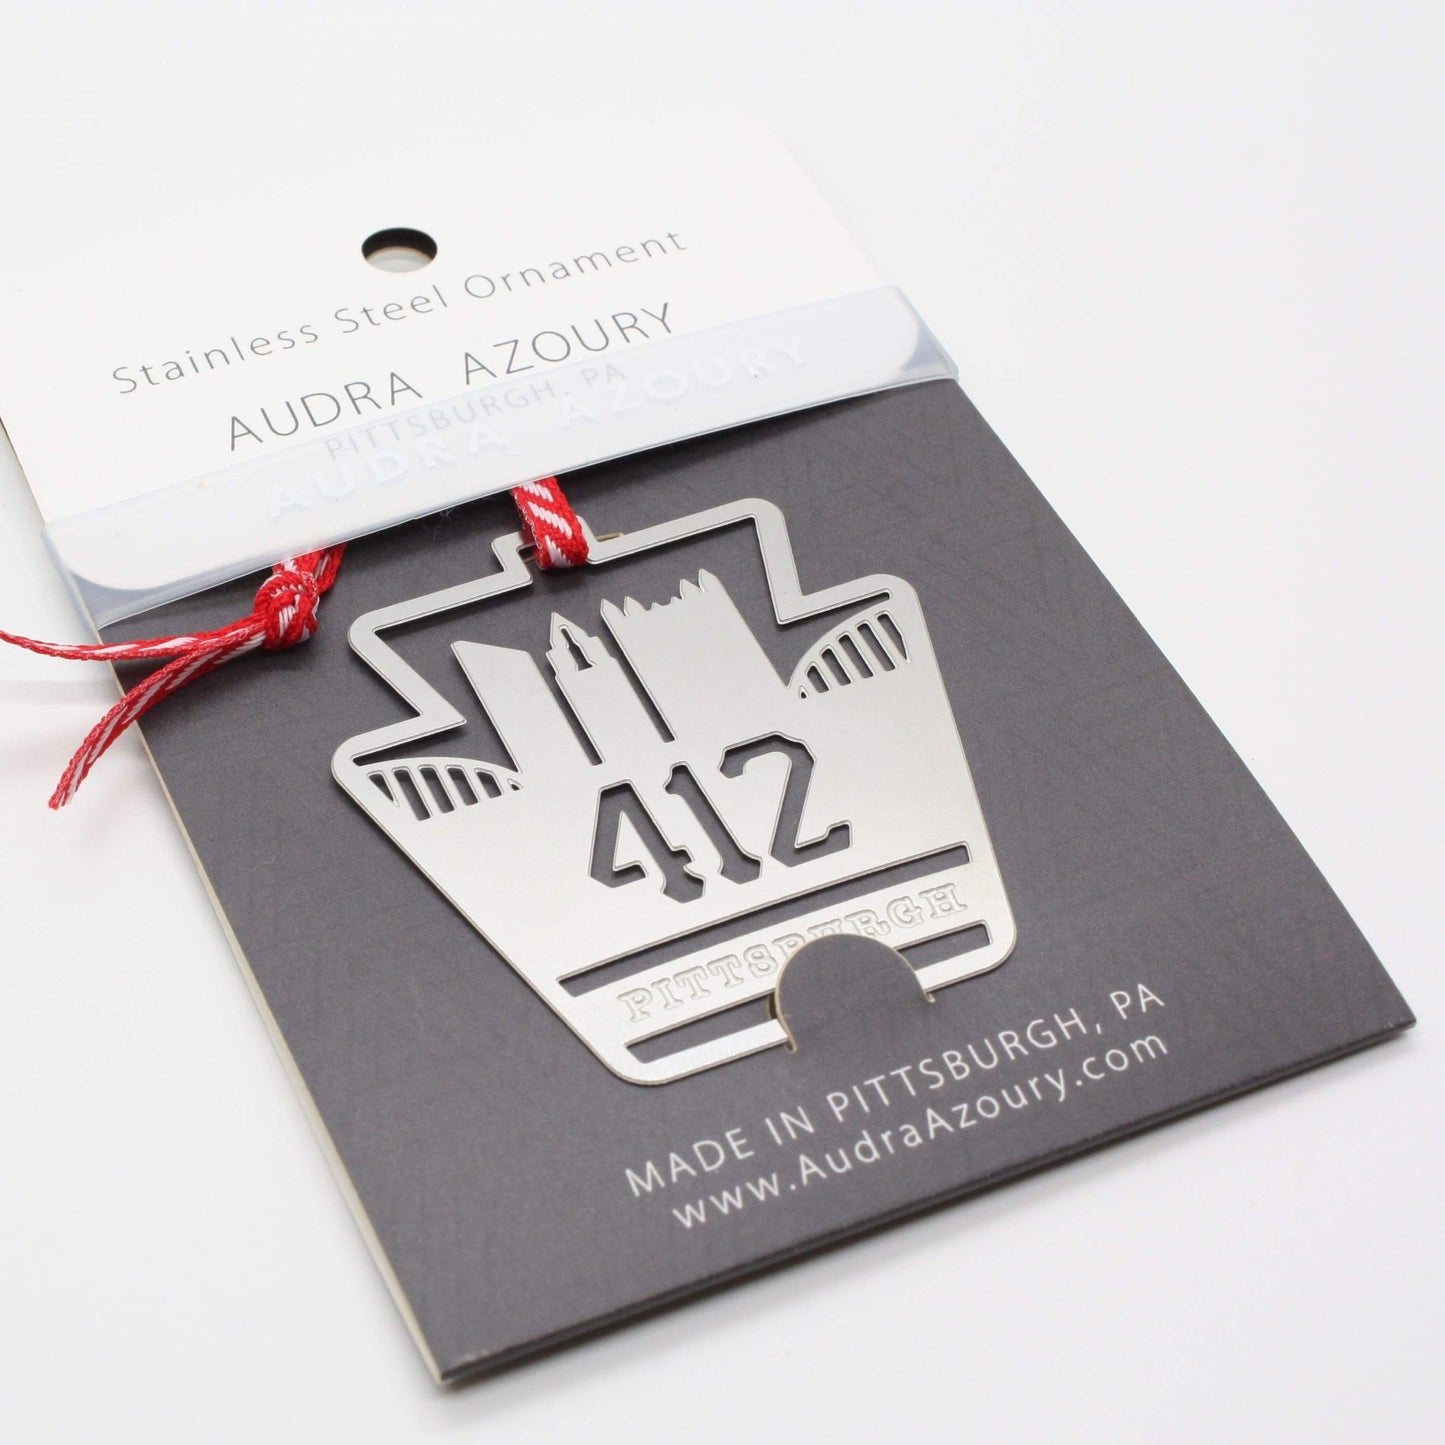 412 area code ornament by audra azoury